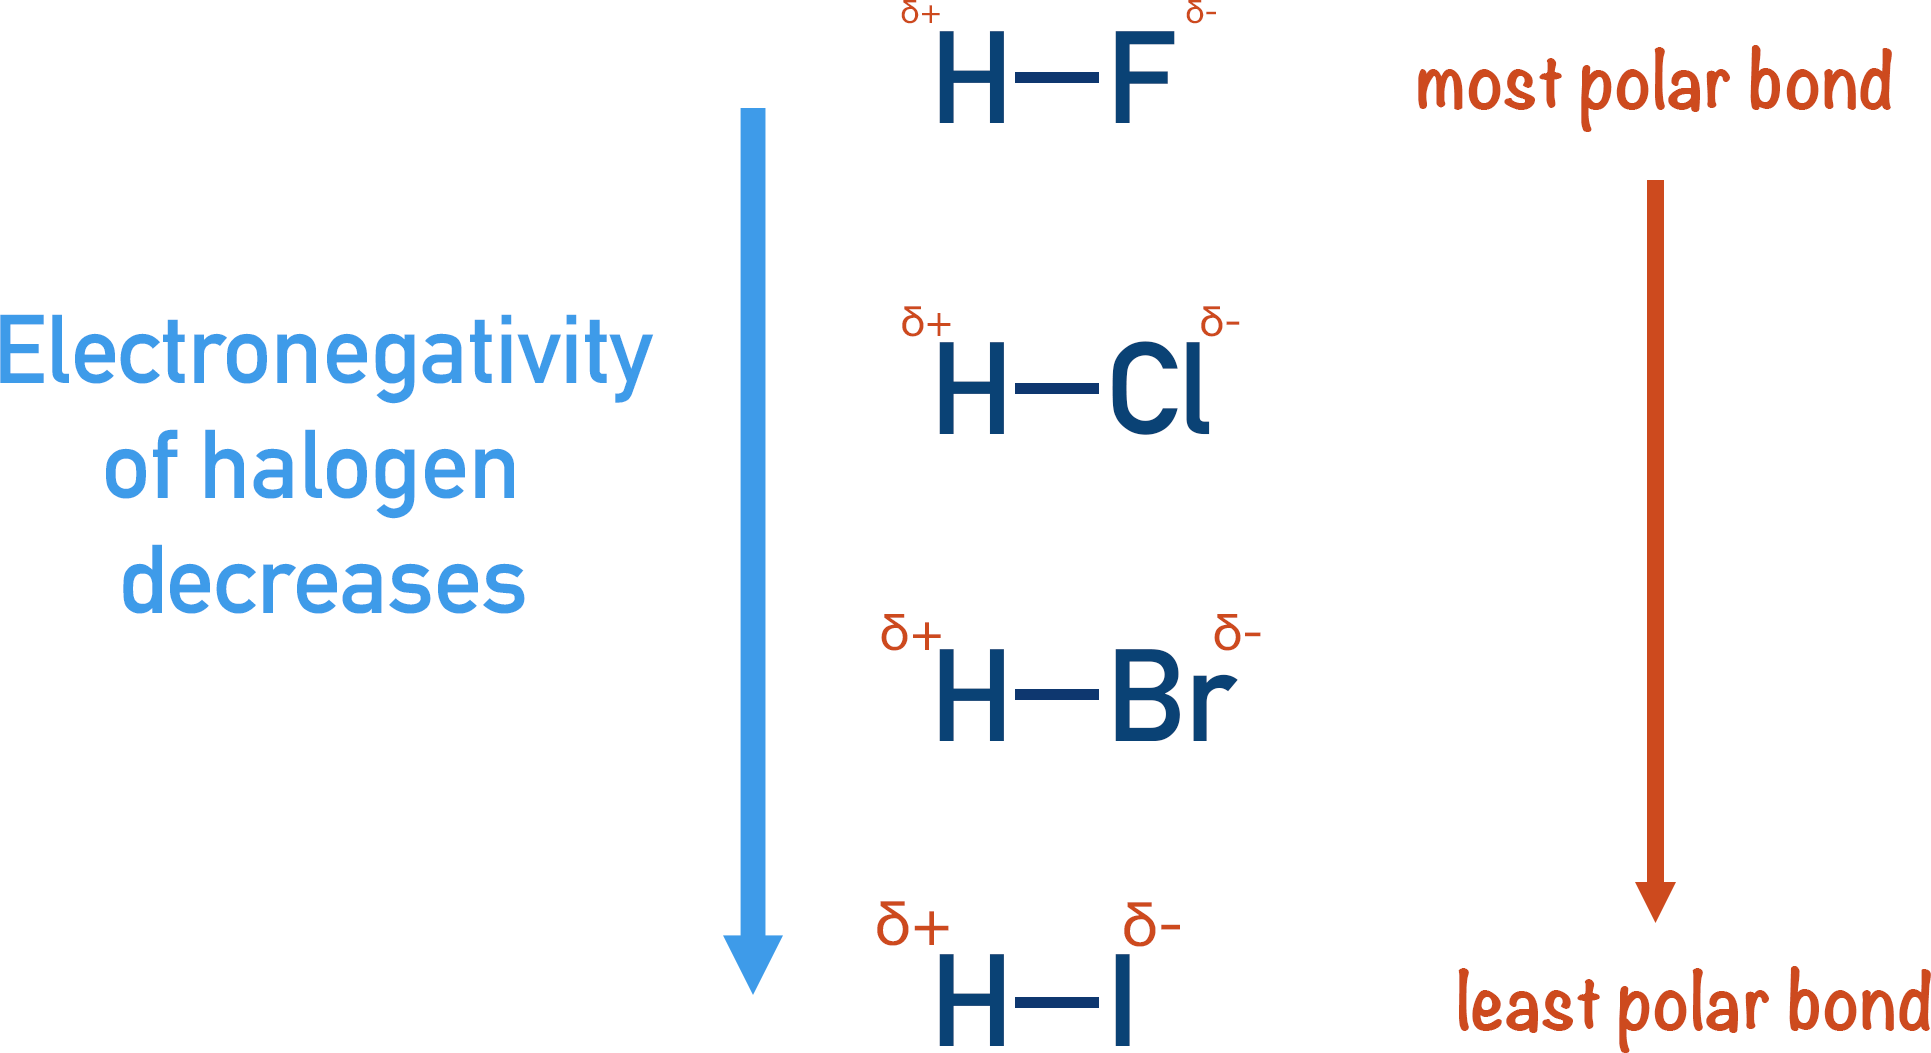 how polarity of hydrogen-halides changes down group 7 due to electronegativities